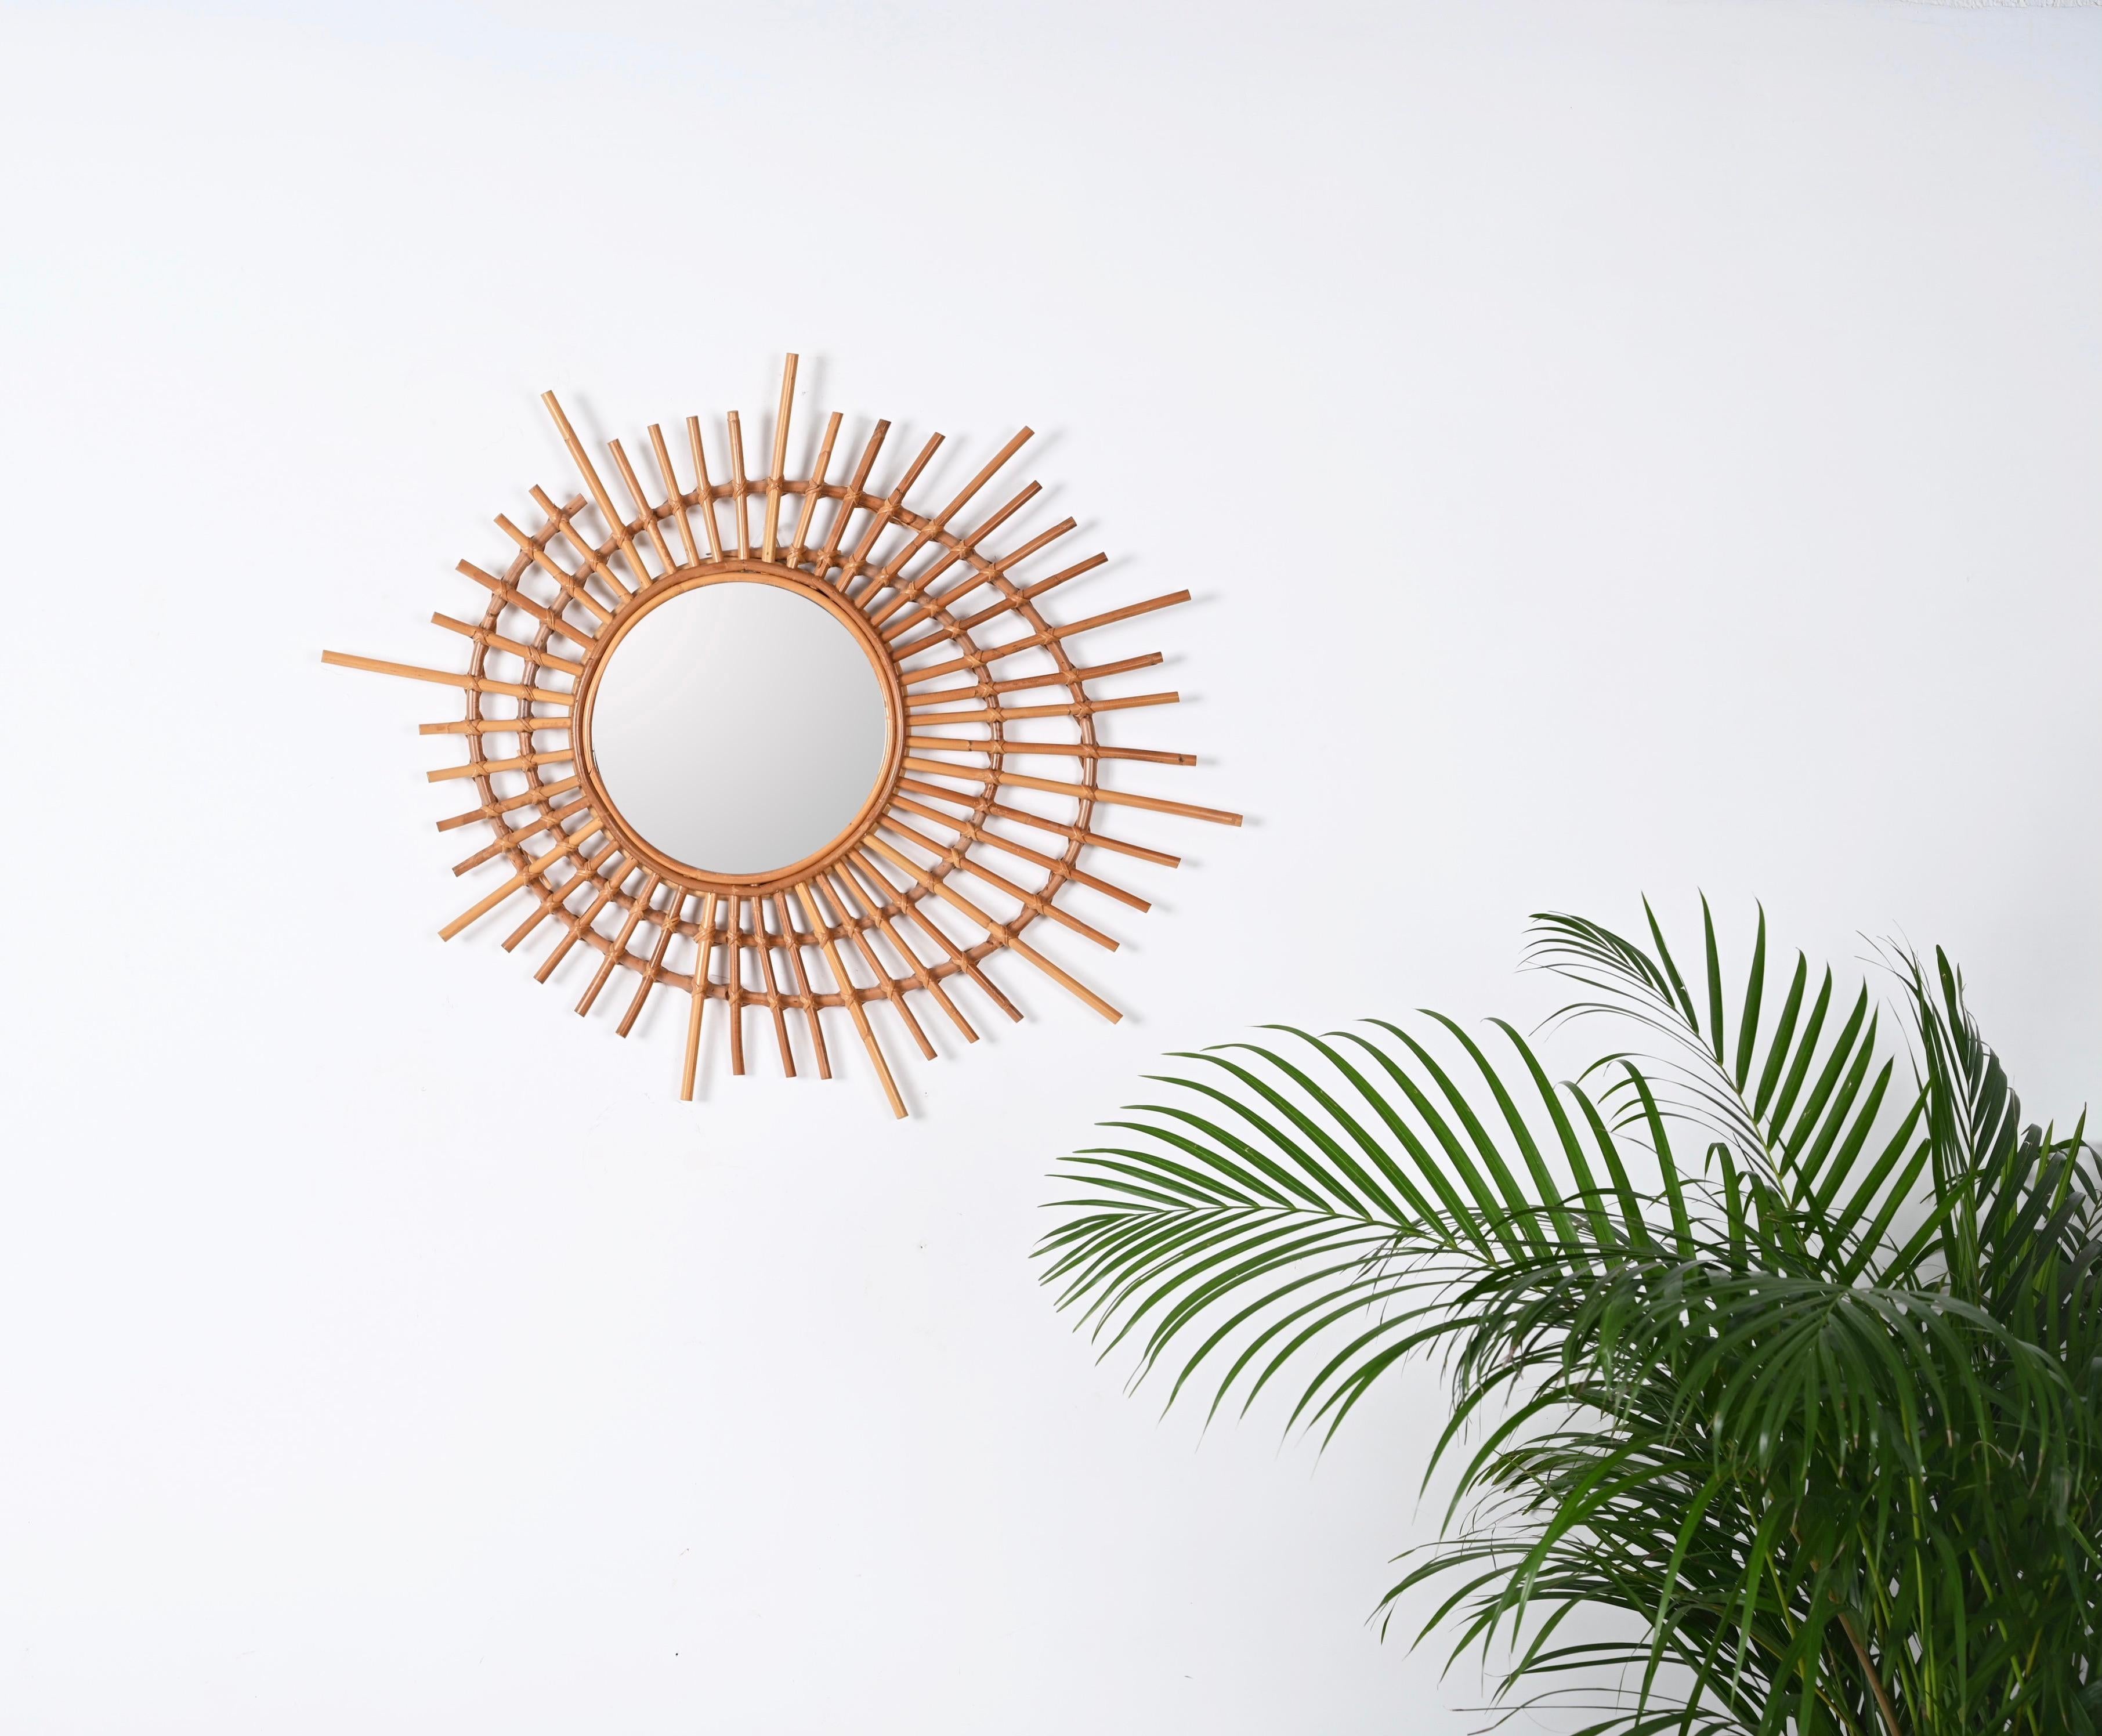 Gorgeous mid-century sun-shaped round mirror in curved rattan and bamboo. This lovelt piece was produced in Italy during 1970s.

This beautiful mirror consists of a stunning spiral-shaped frame in curved rattan decorated by straight rattan beams